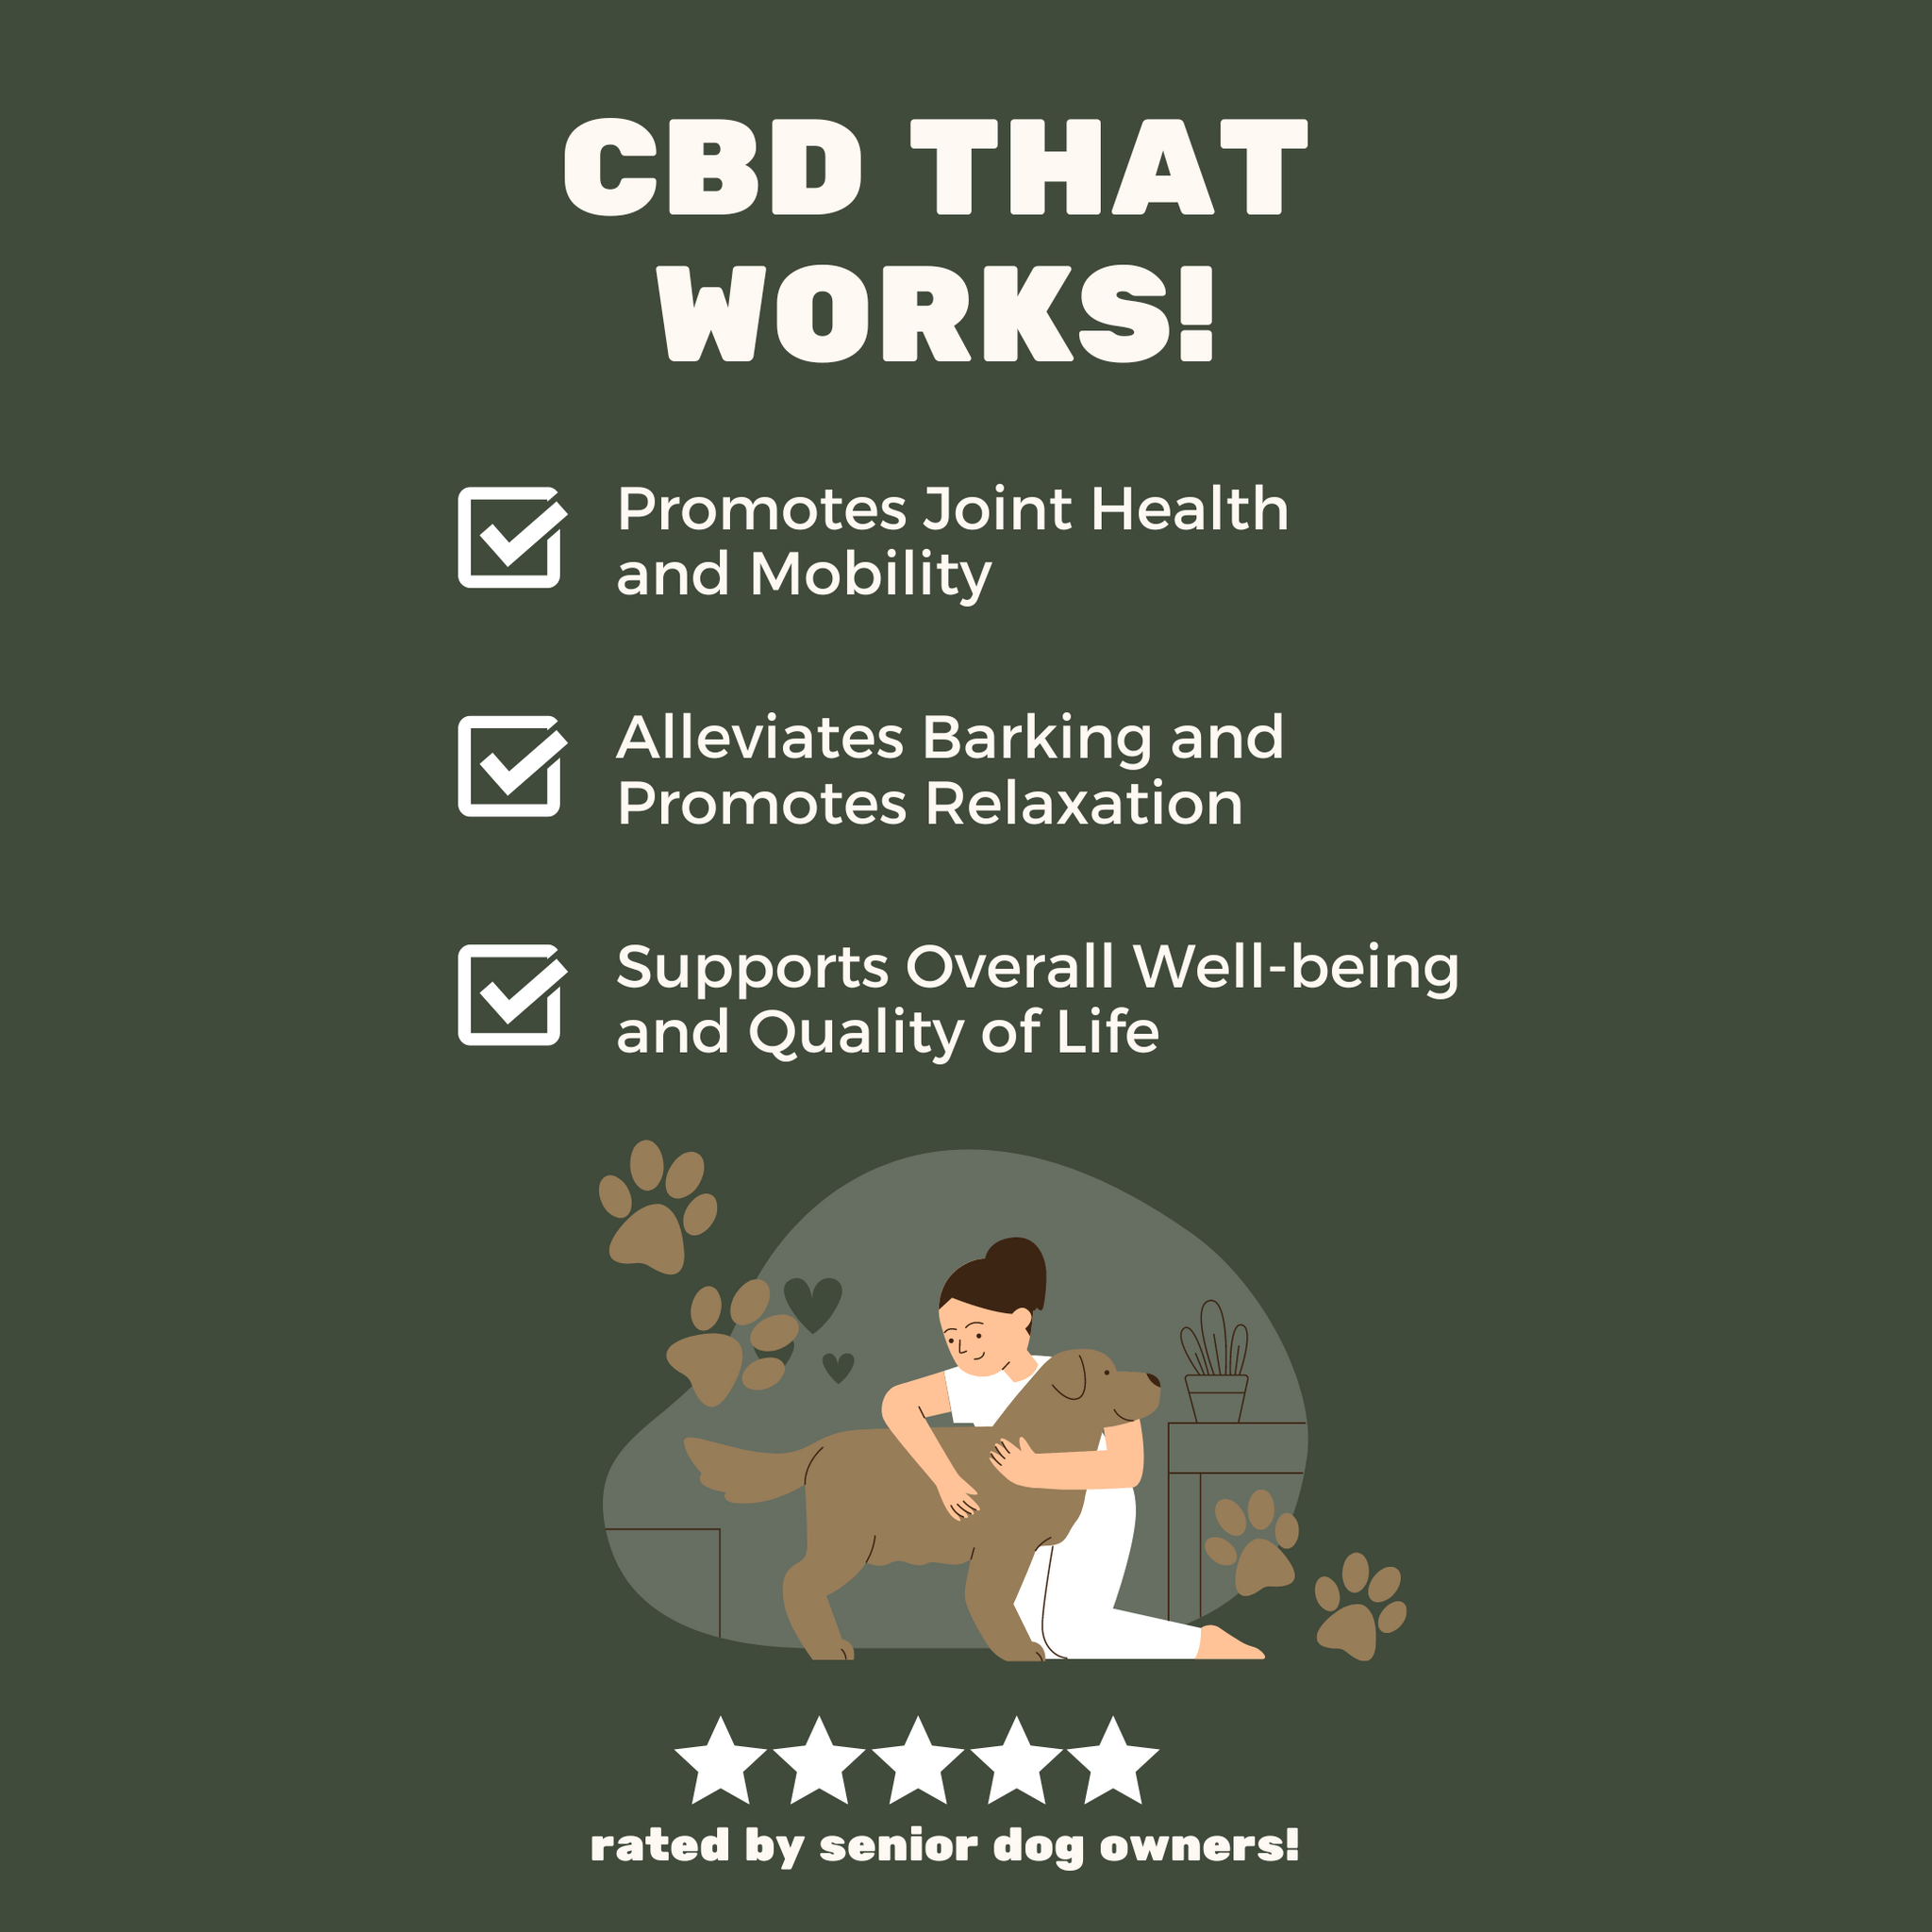 Medium Wild Salmon CBD Oil - 350 MG : 1 OZ : Healthy Hips & Joints Care Formula CBD for dogs and cats